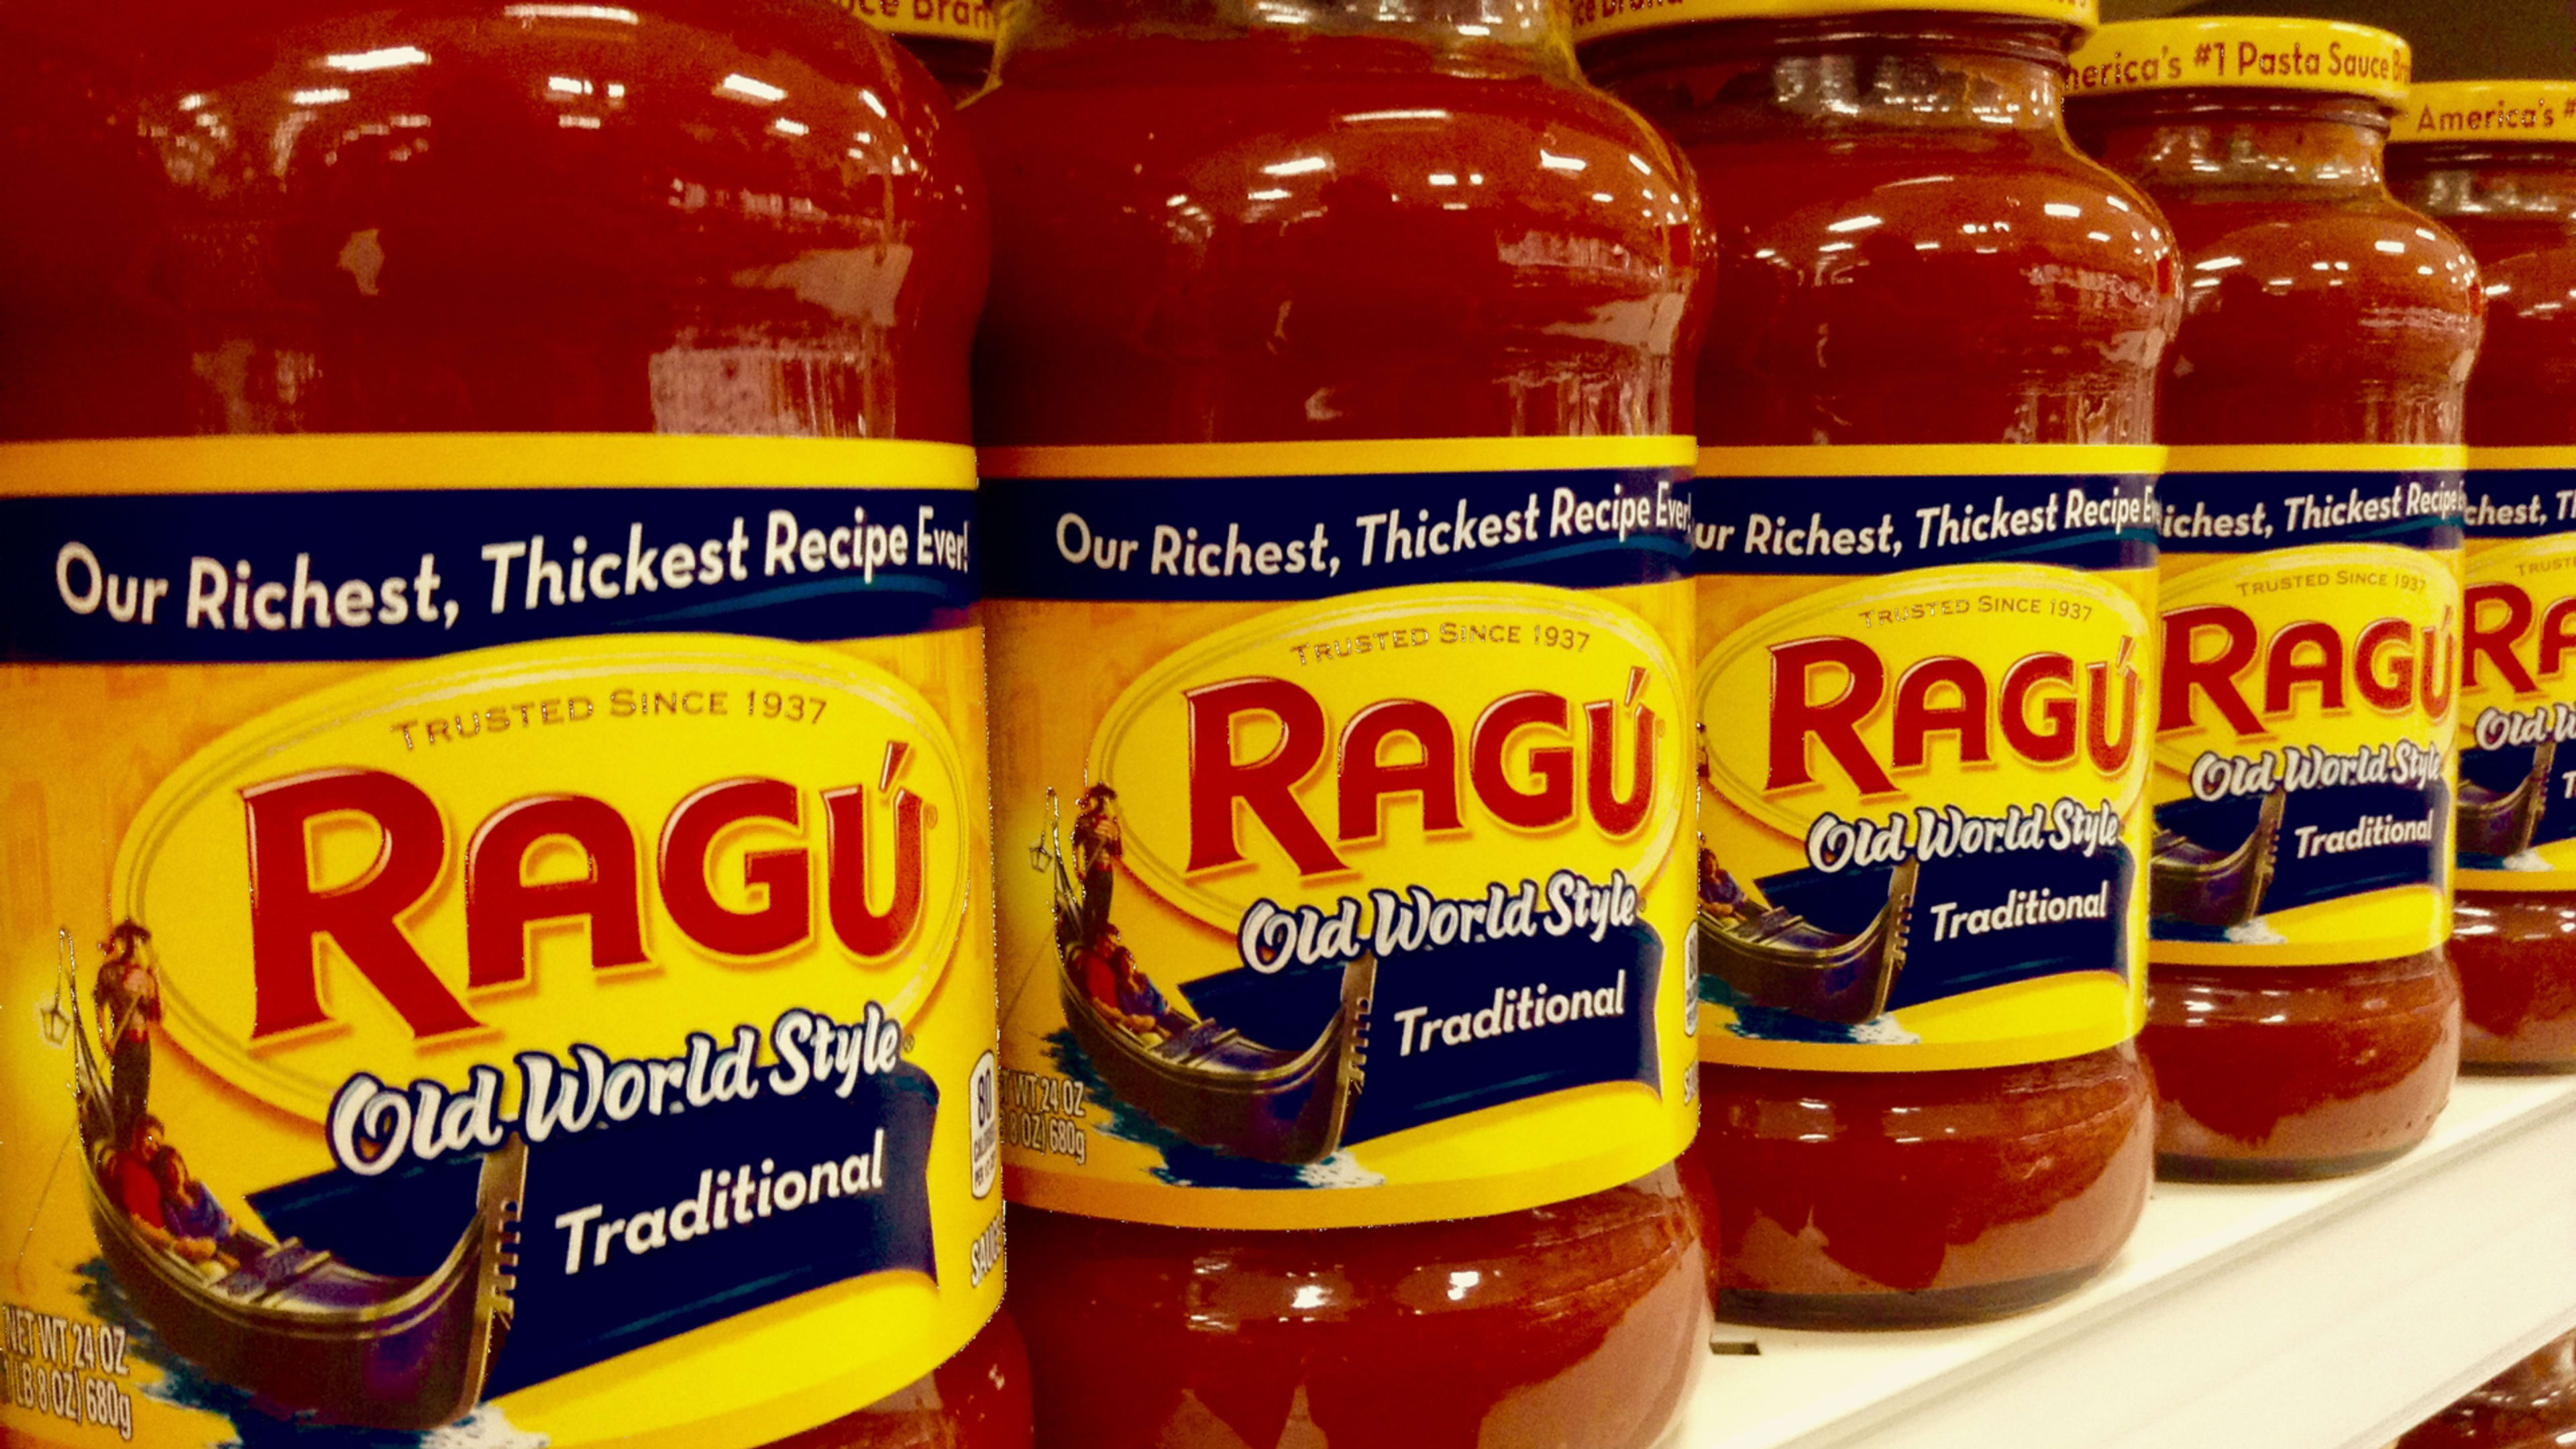 Ragu recall: 5 red sauces to avoid right now after plastic contamination fears